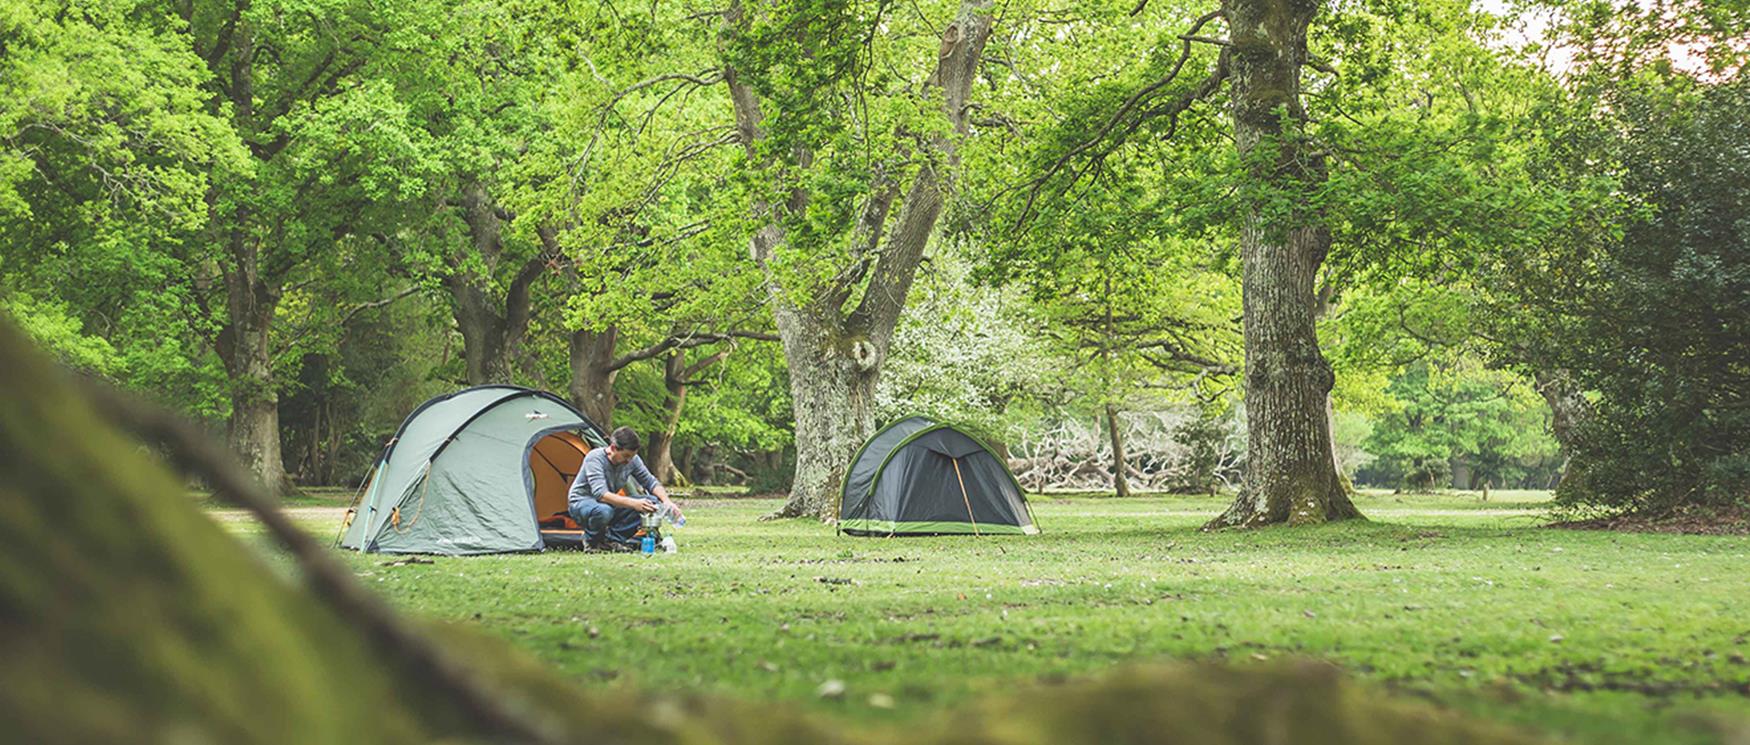 Camping in Hampshire